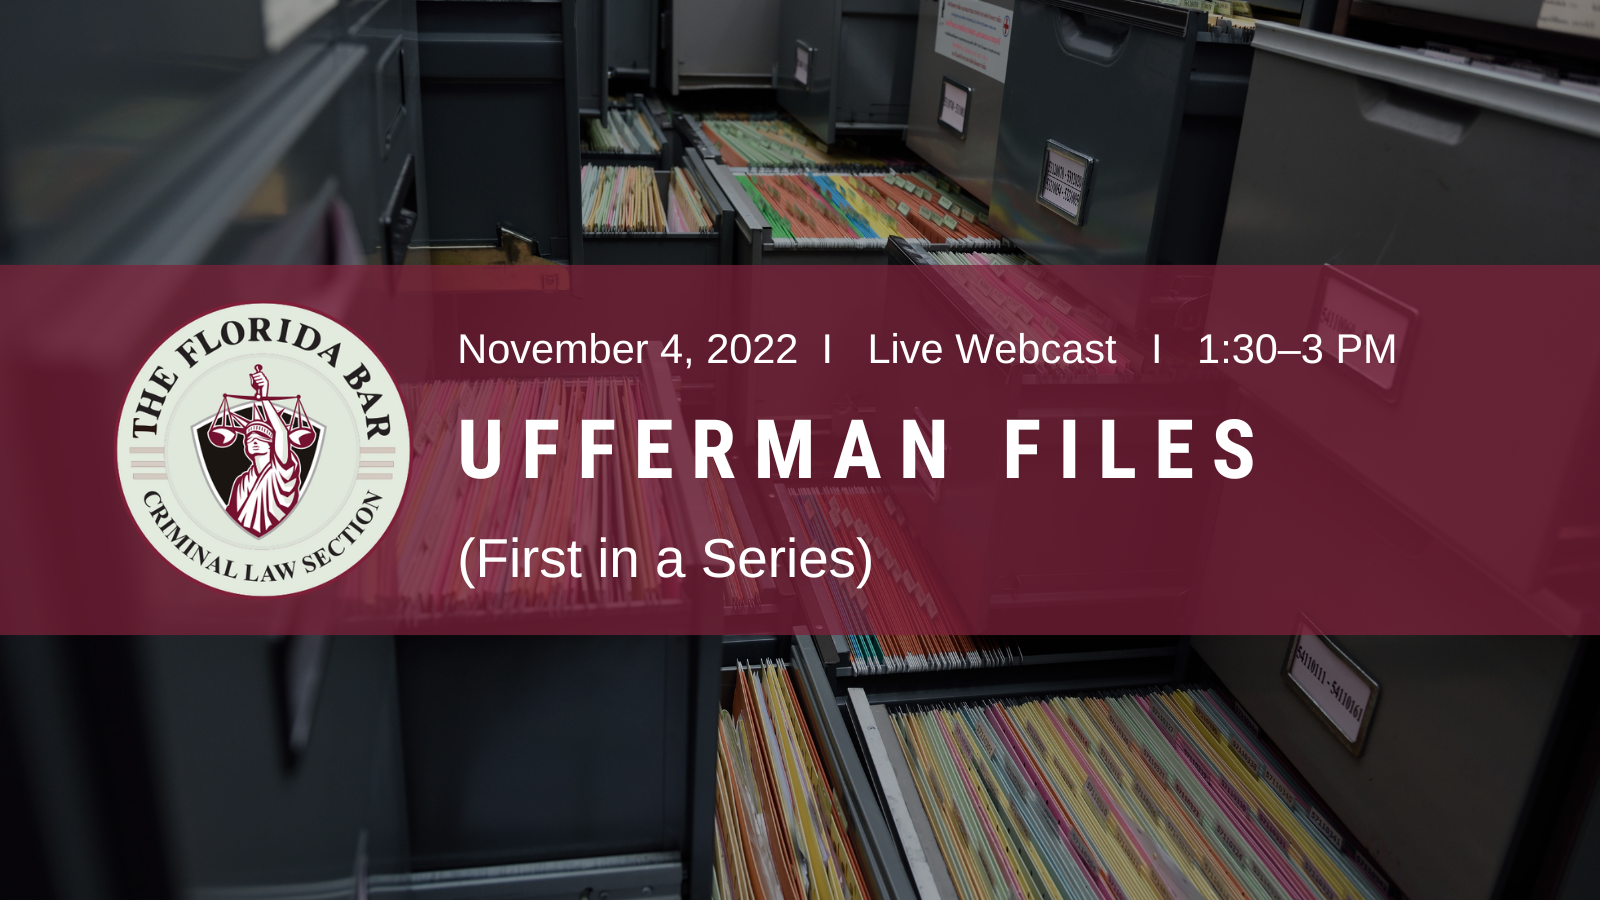 Image of a room full of filing cabinets, the Criminal Law Section logo, and text